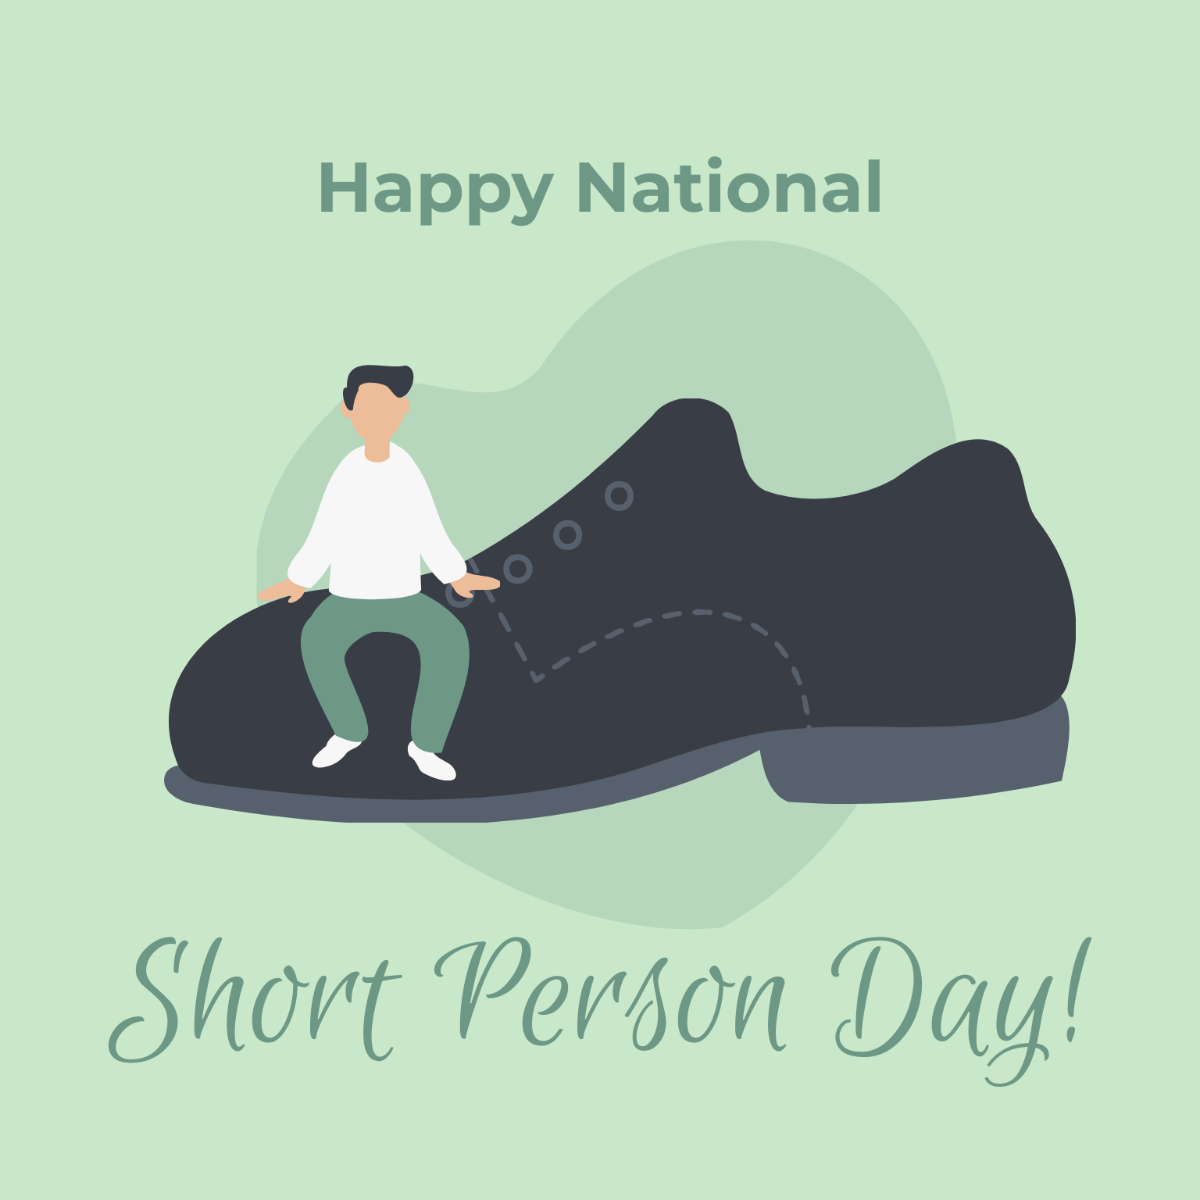 Happy National Short Person Day Illustration Template